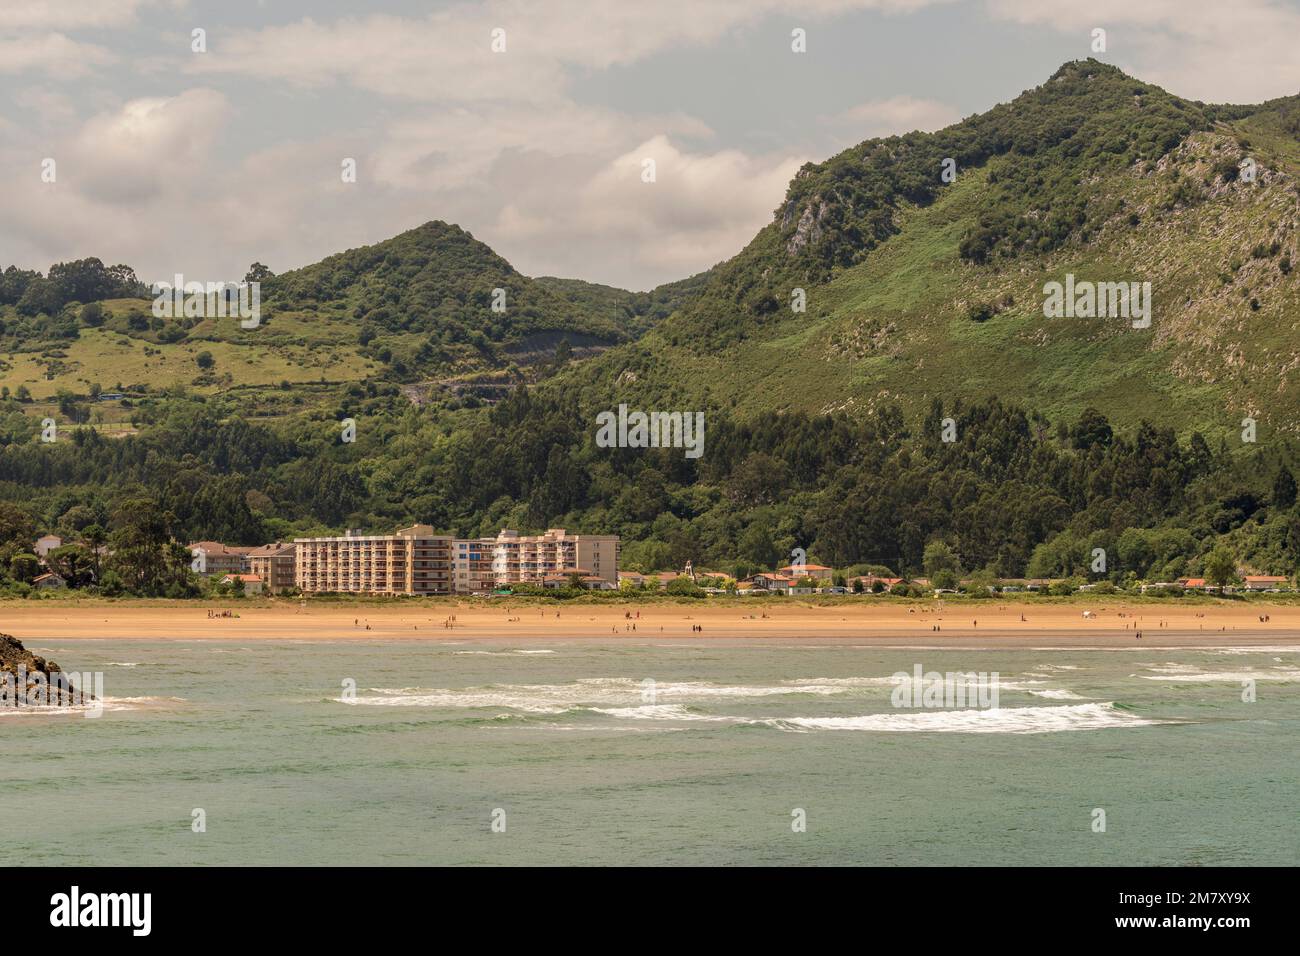 View of apartment buildings, houses and people sunbathing on the sand of Oriñon beach from the town of Islares in Cantabria, Spain Stock Photo